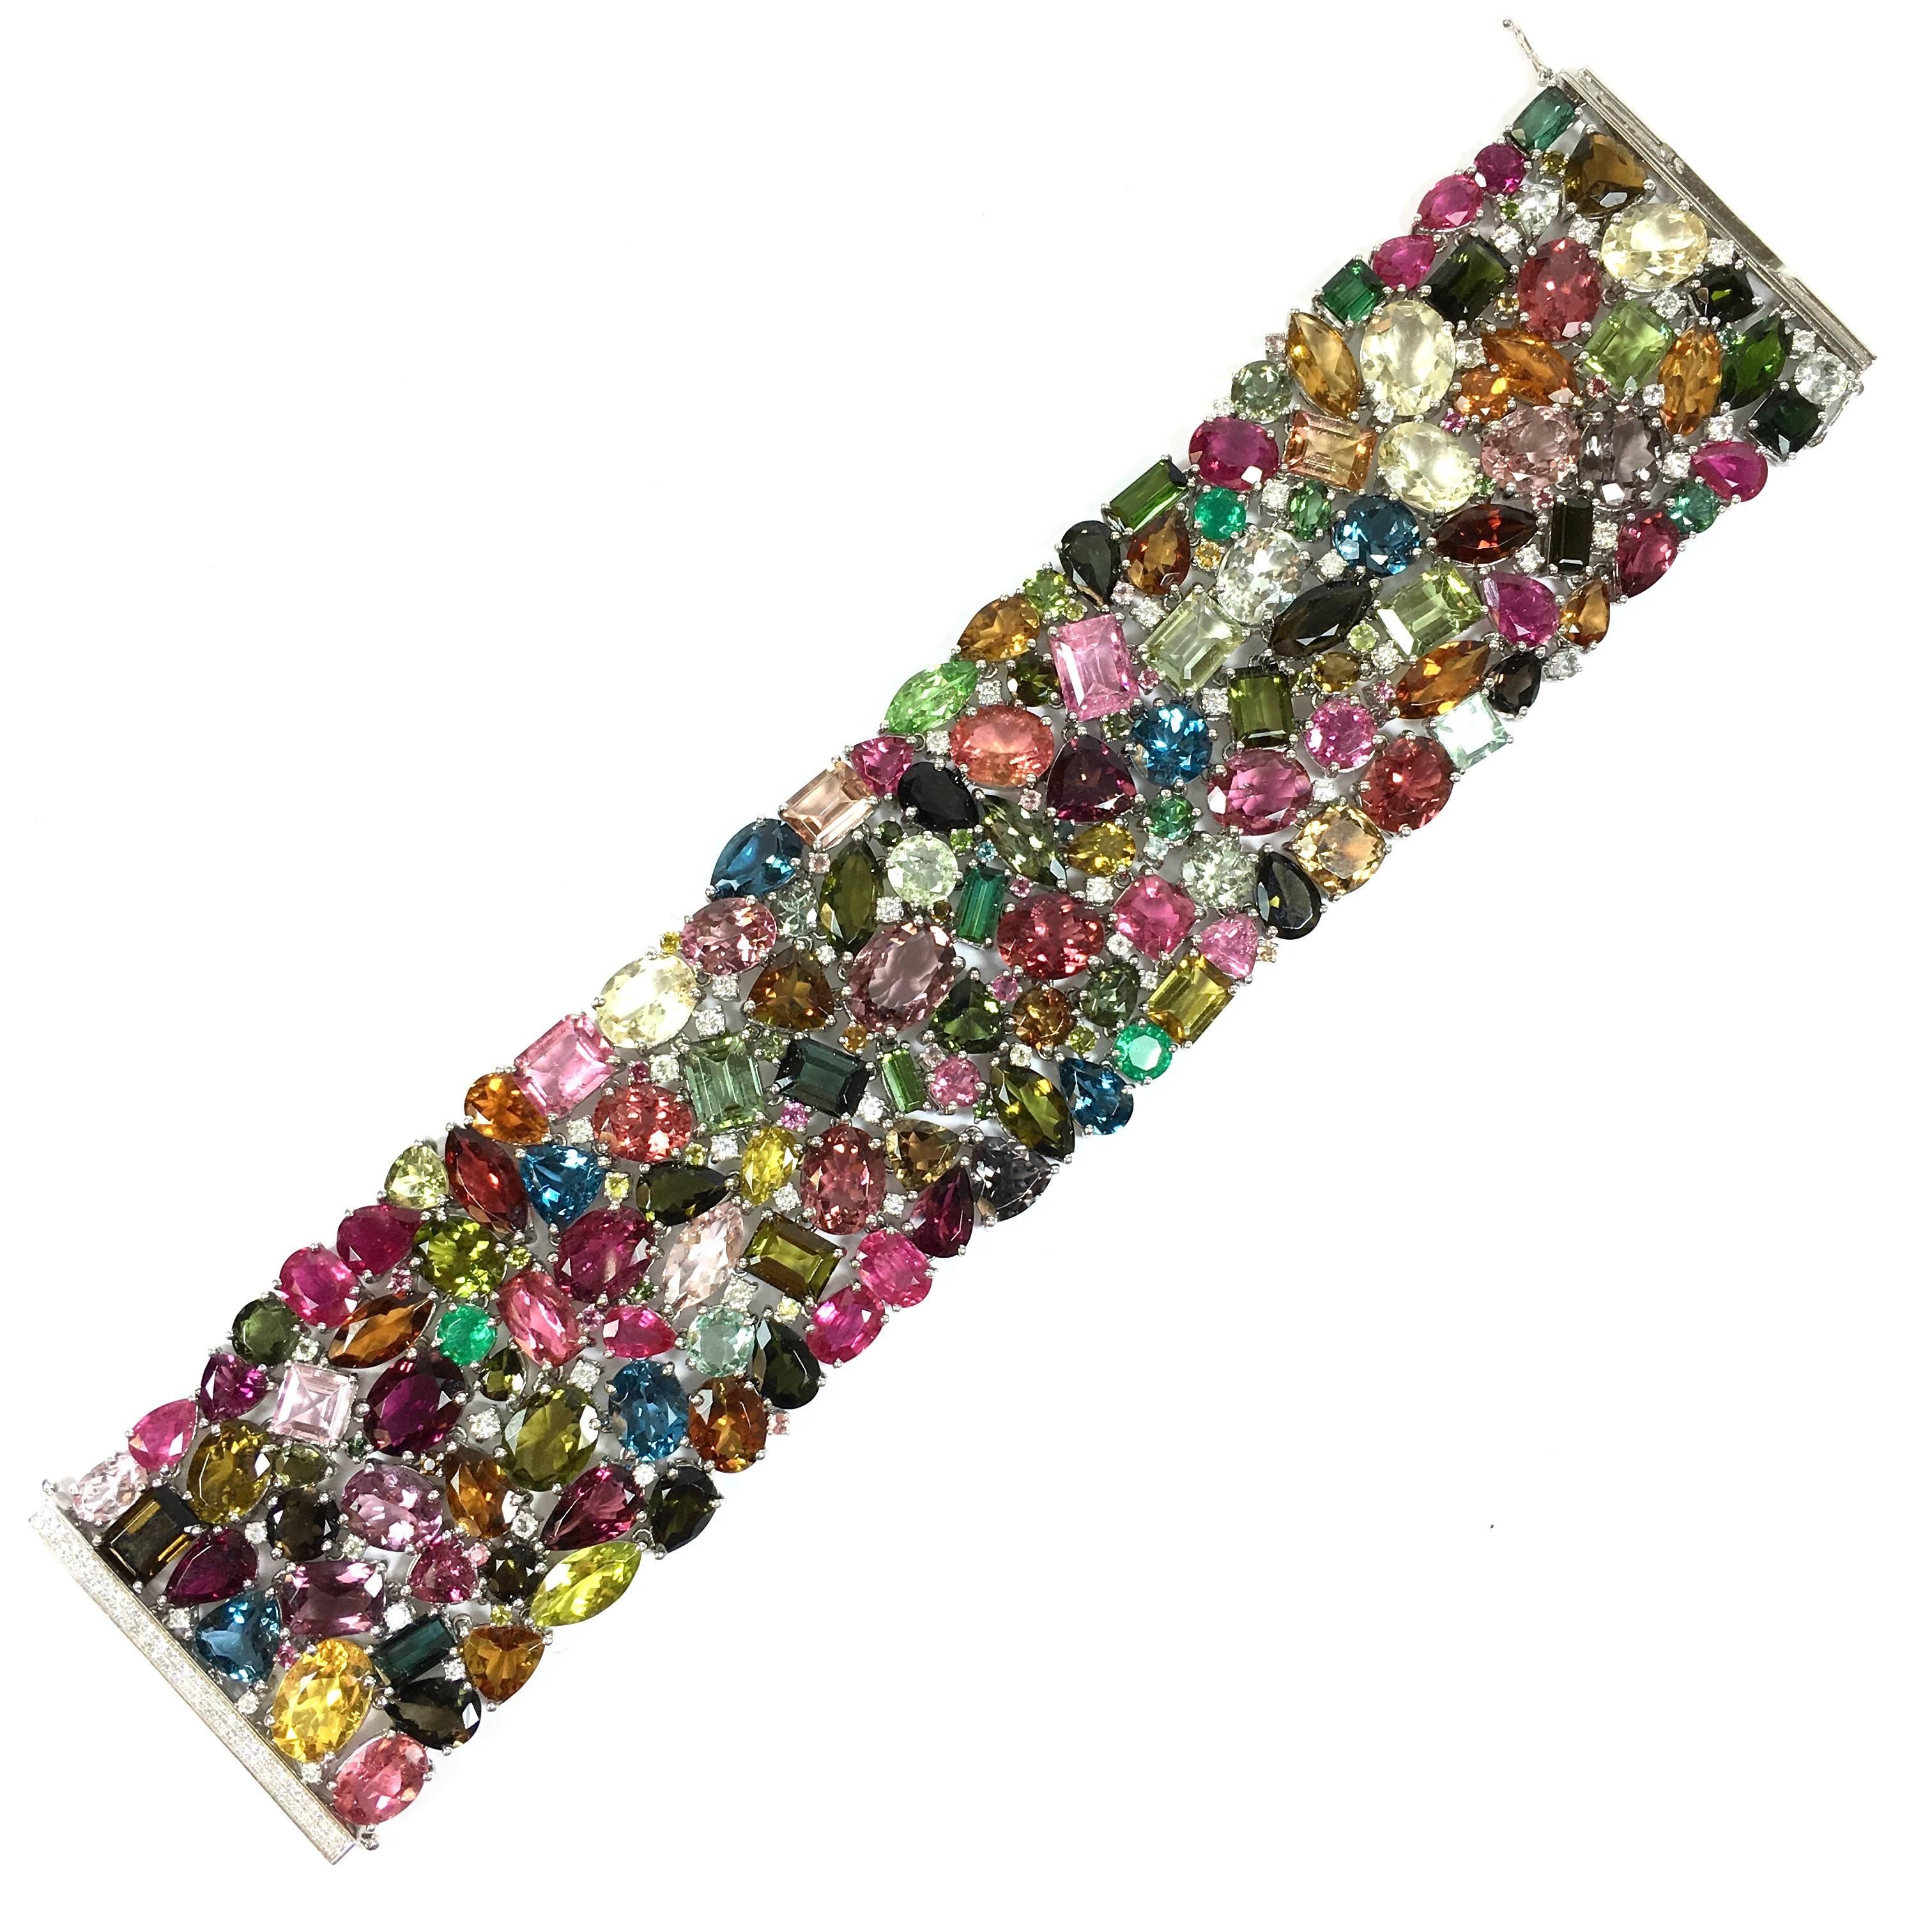 Amazing one of a kind 18K white gold bracelet, composed of 232.50 carats of colored gemstones, (including pink, green, yellow, rubellite and blue tourmaline, aquamarine, peridot, emerald topaz) and 2.10 cts of diamonds.  The bracelet is 1 5/8